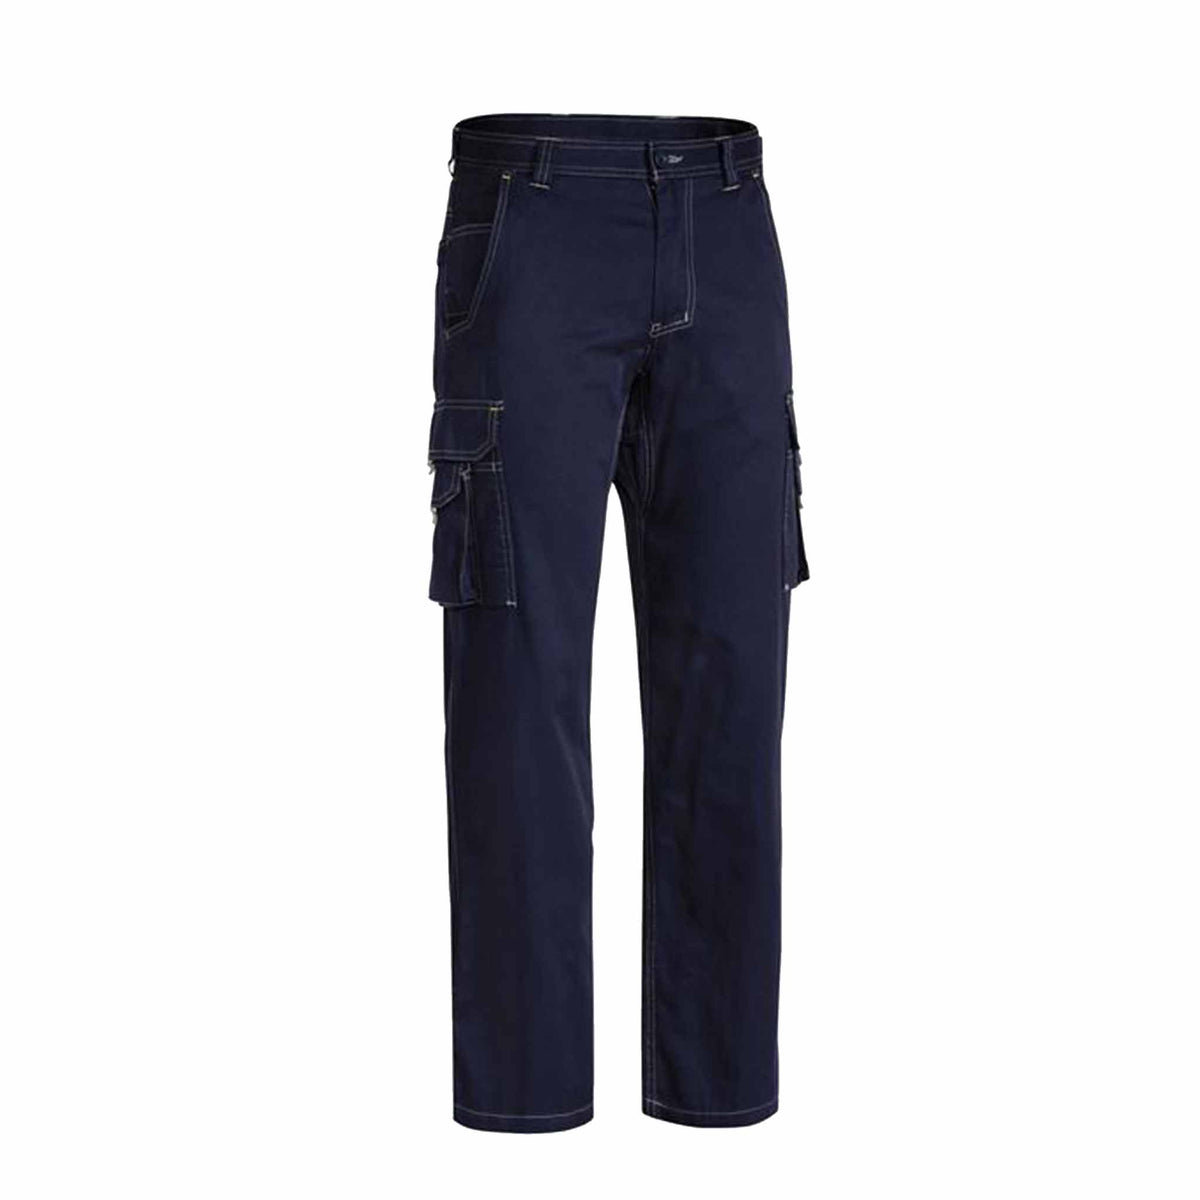 navy cool vented light weight cargo pants